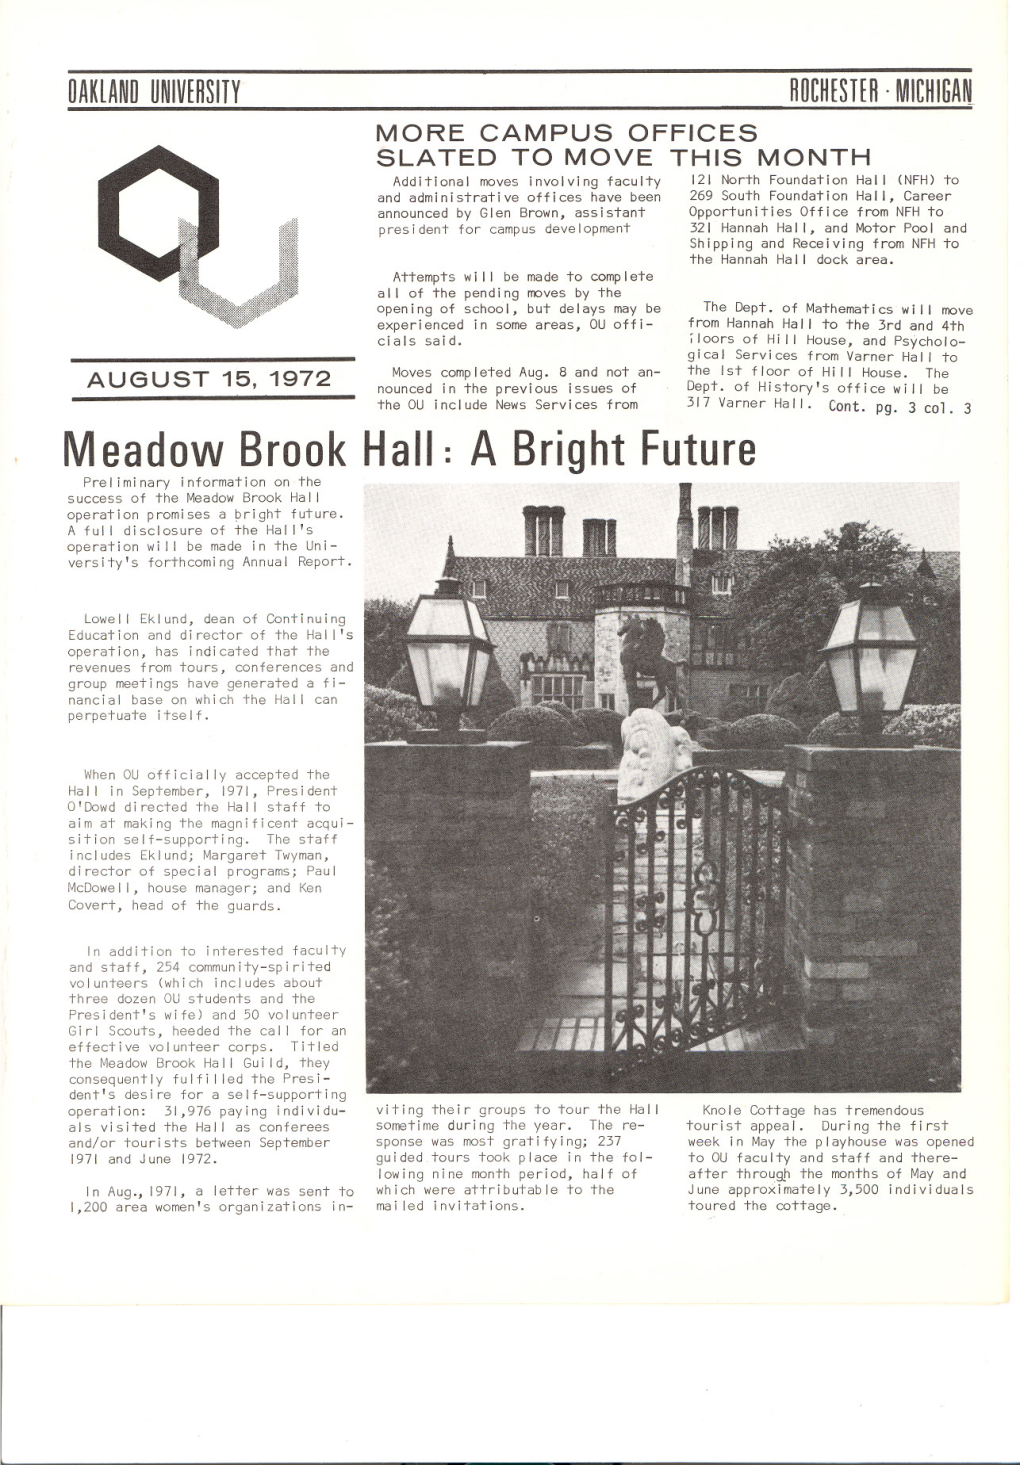 Meadow Brook Hall: a Bright Future Prel Iminary Information on the Success of the Meadow Brook Hal I Operation Promises a Bright Future